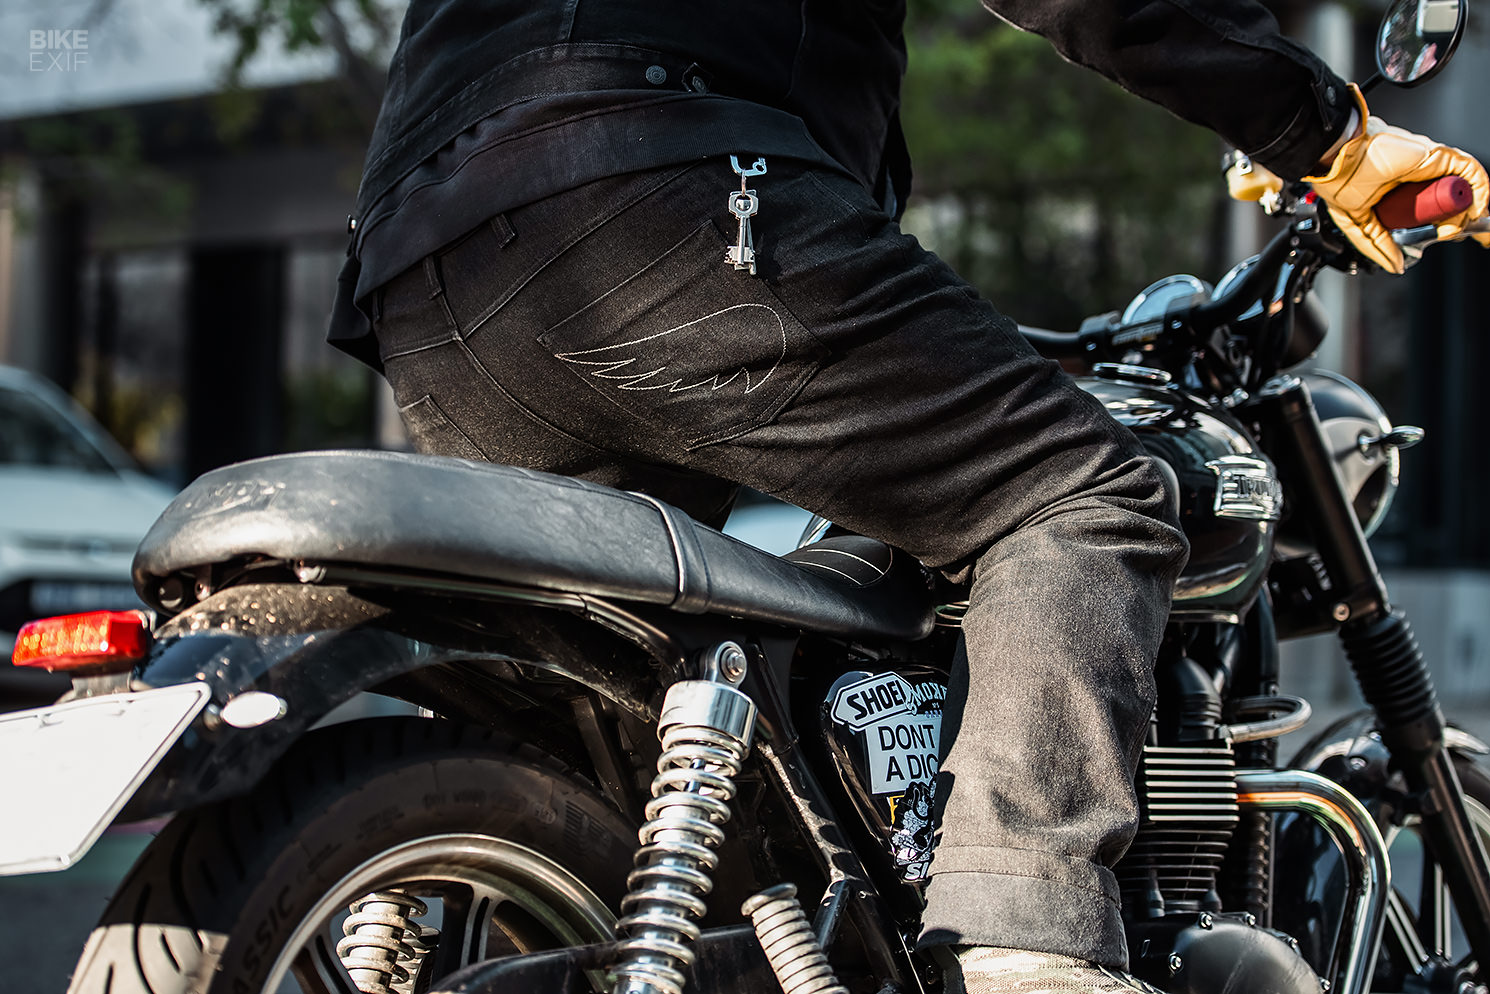 The Best Motorcycle Jeans To Keep You Safe And Look Stylish